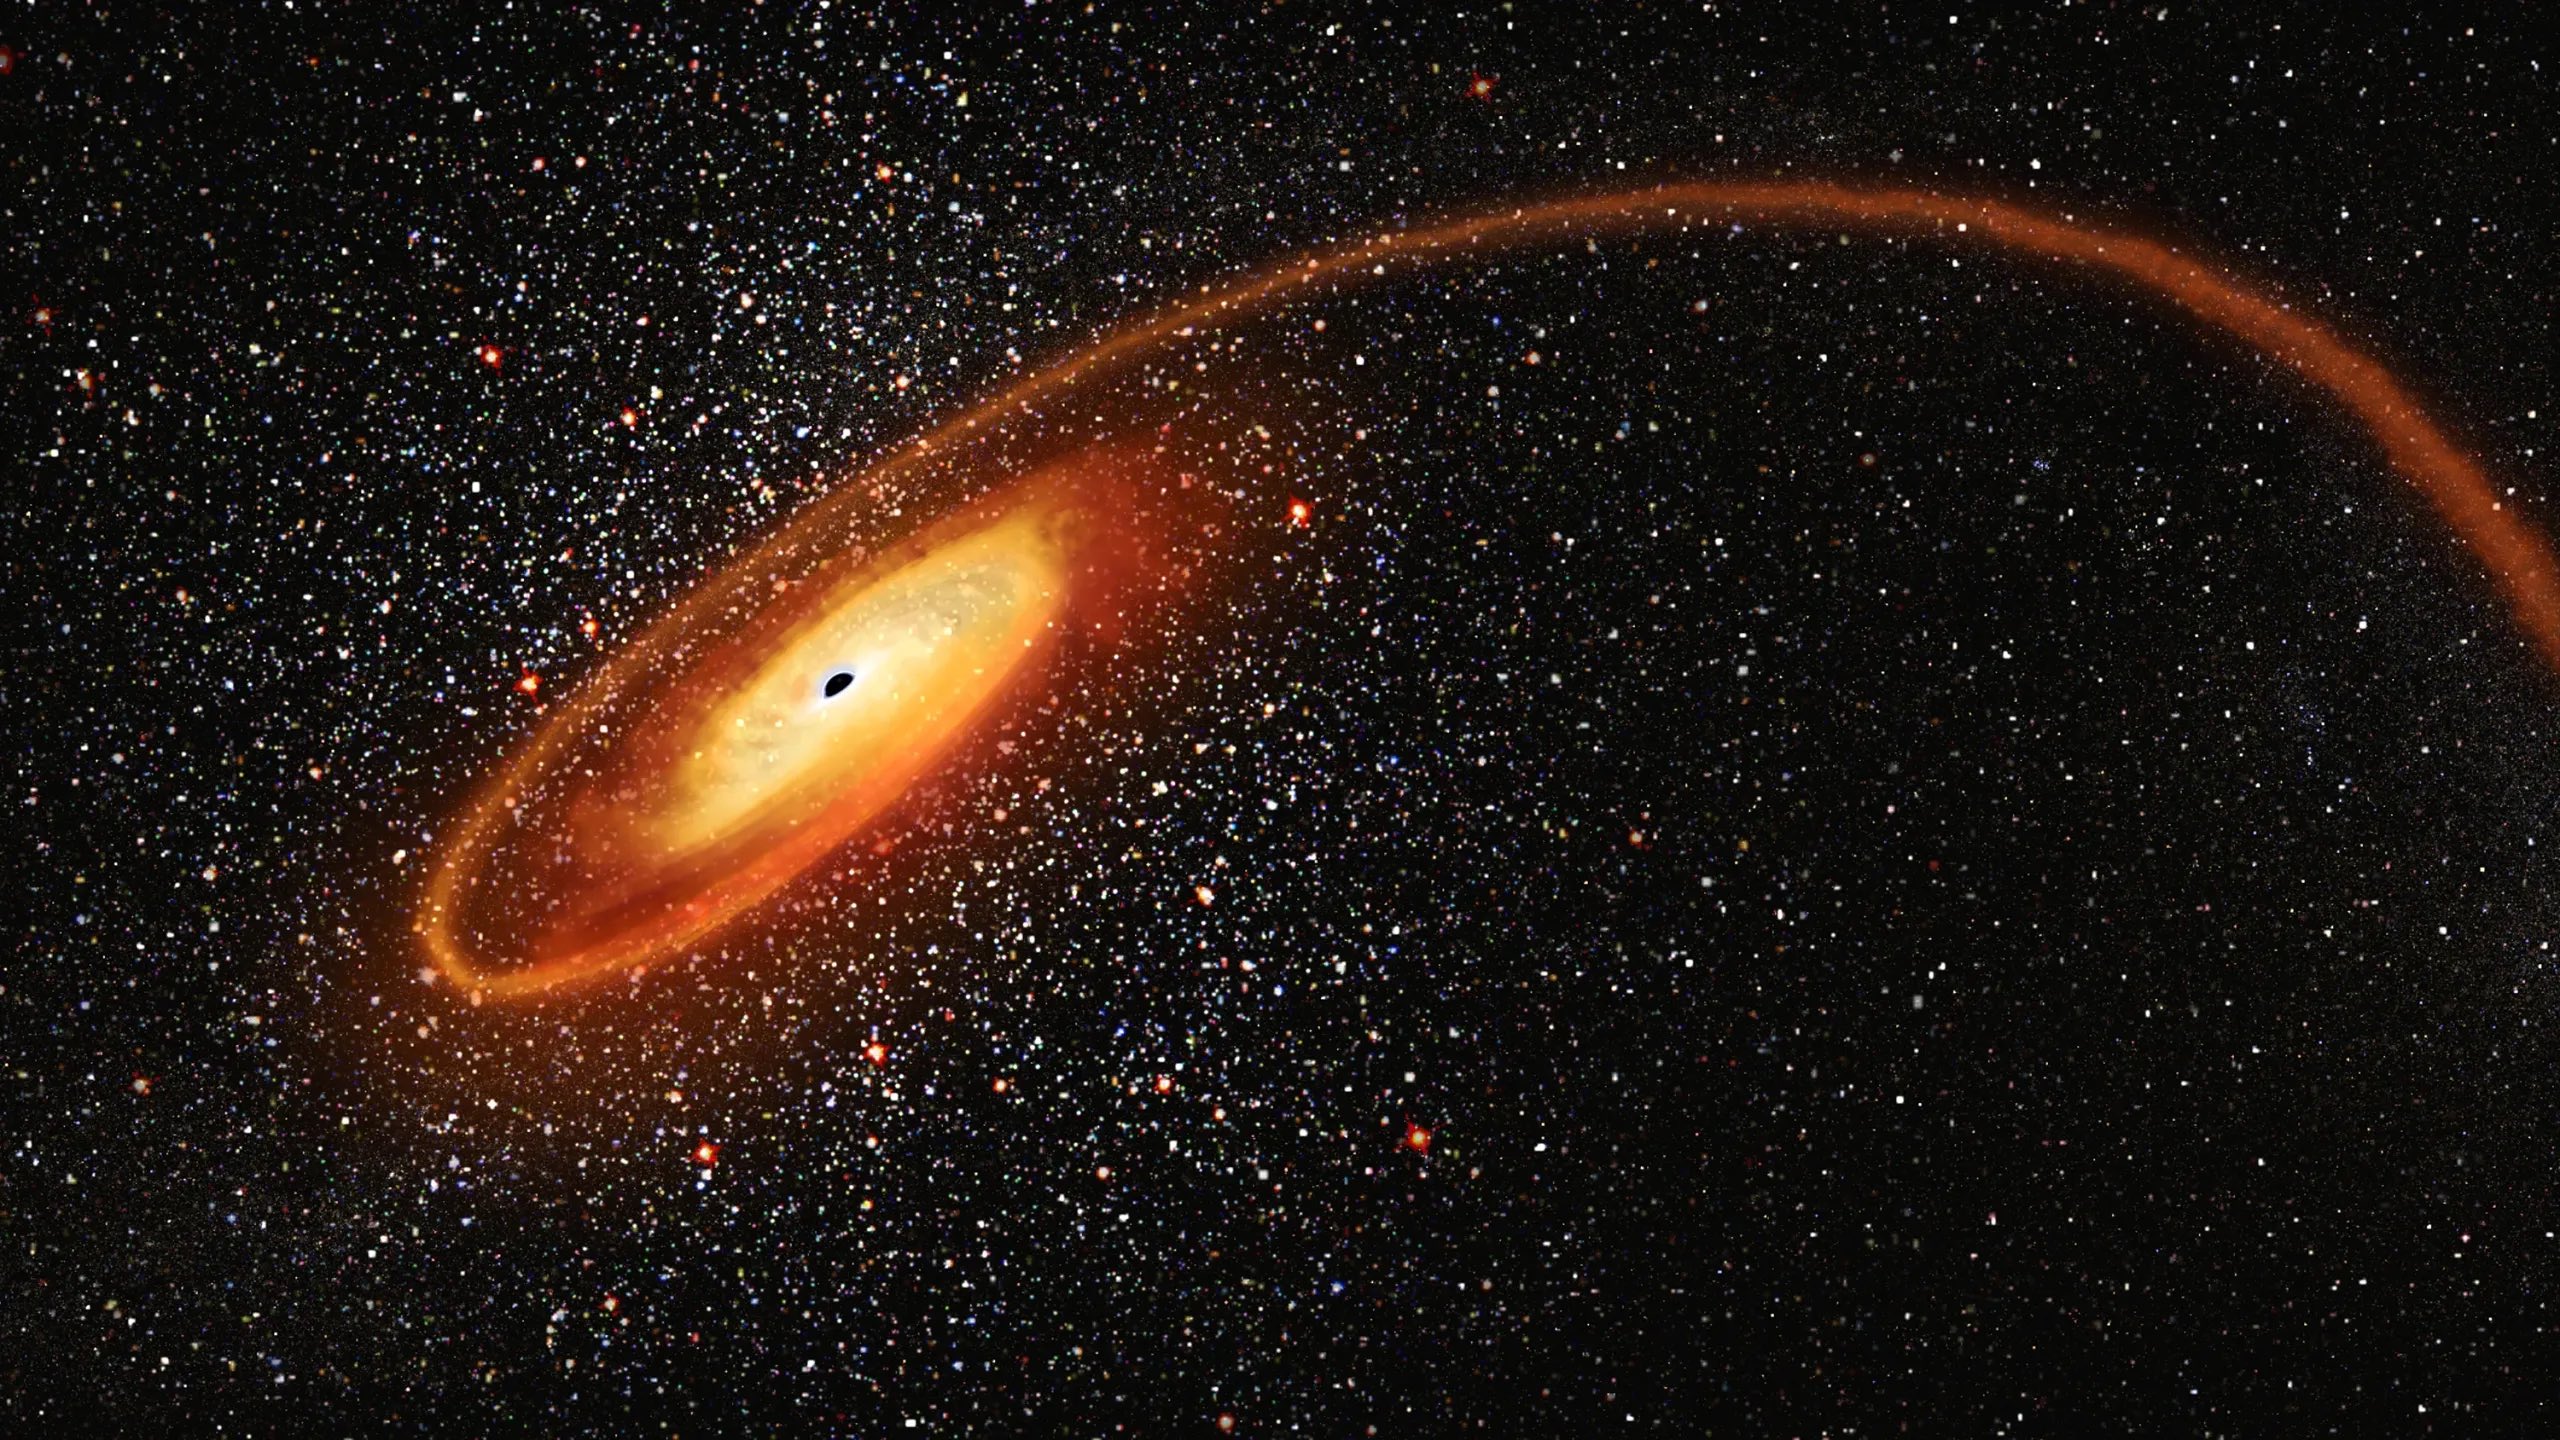 A star destroyed by a giant black hole may have masqueraded as a gamma ray burst